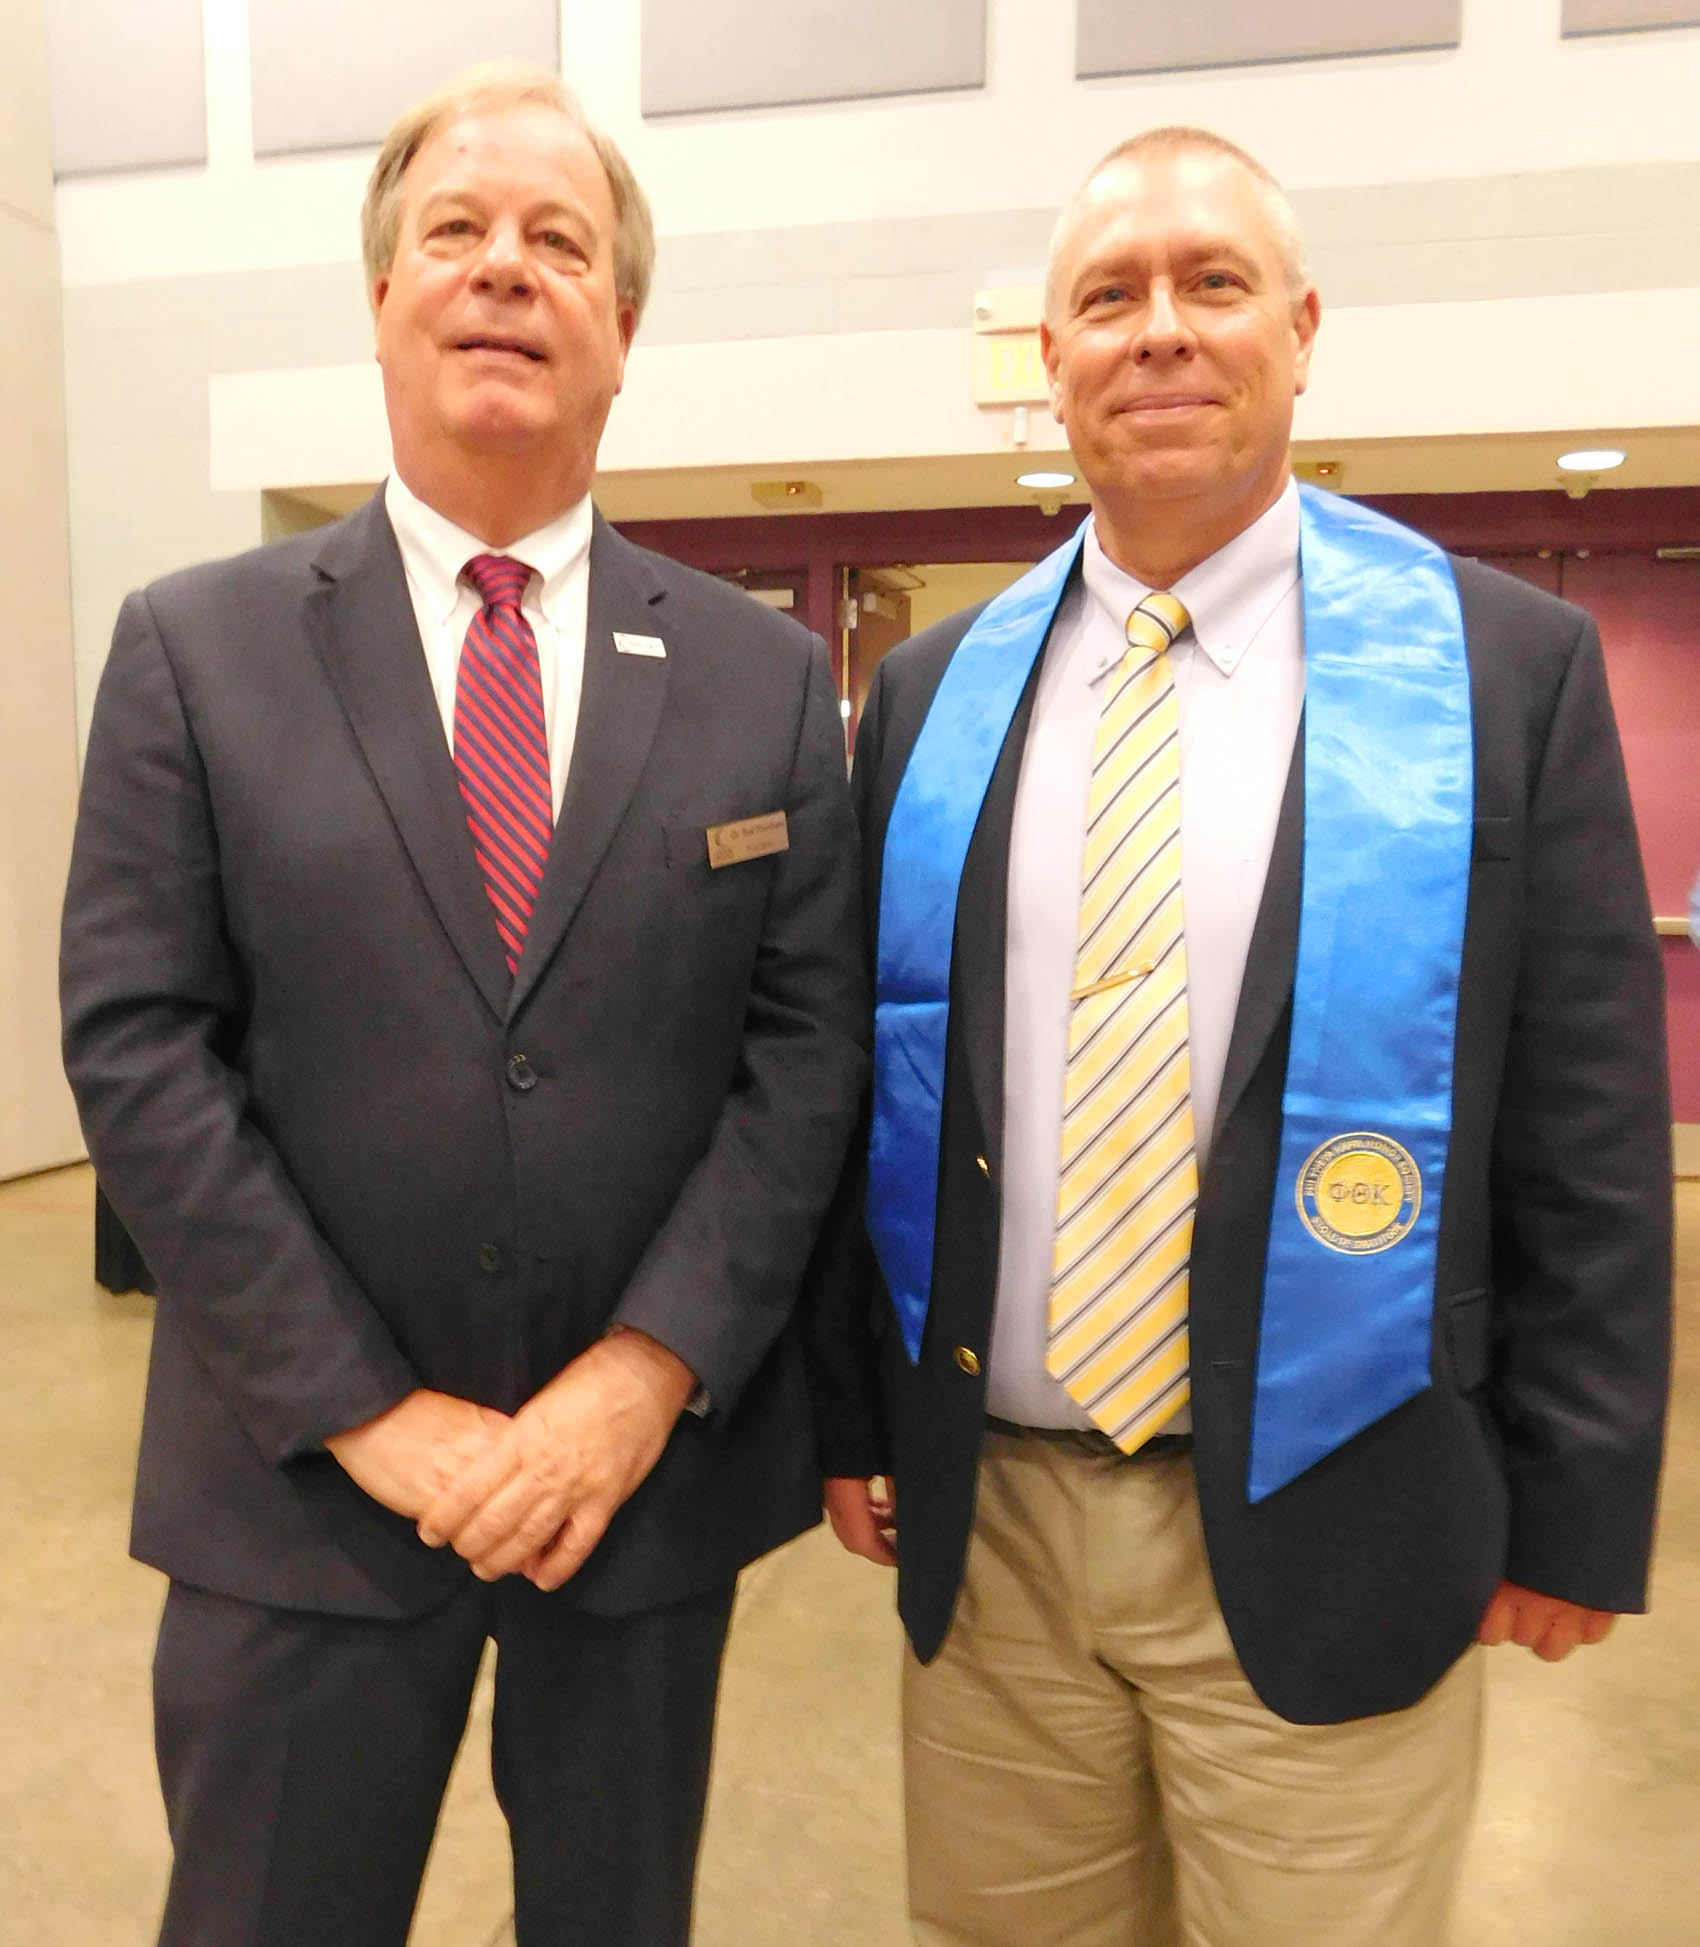 Read the full story, PTK going strong at CCCC